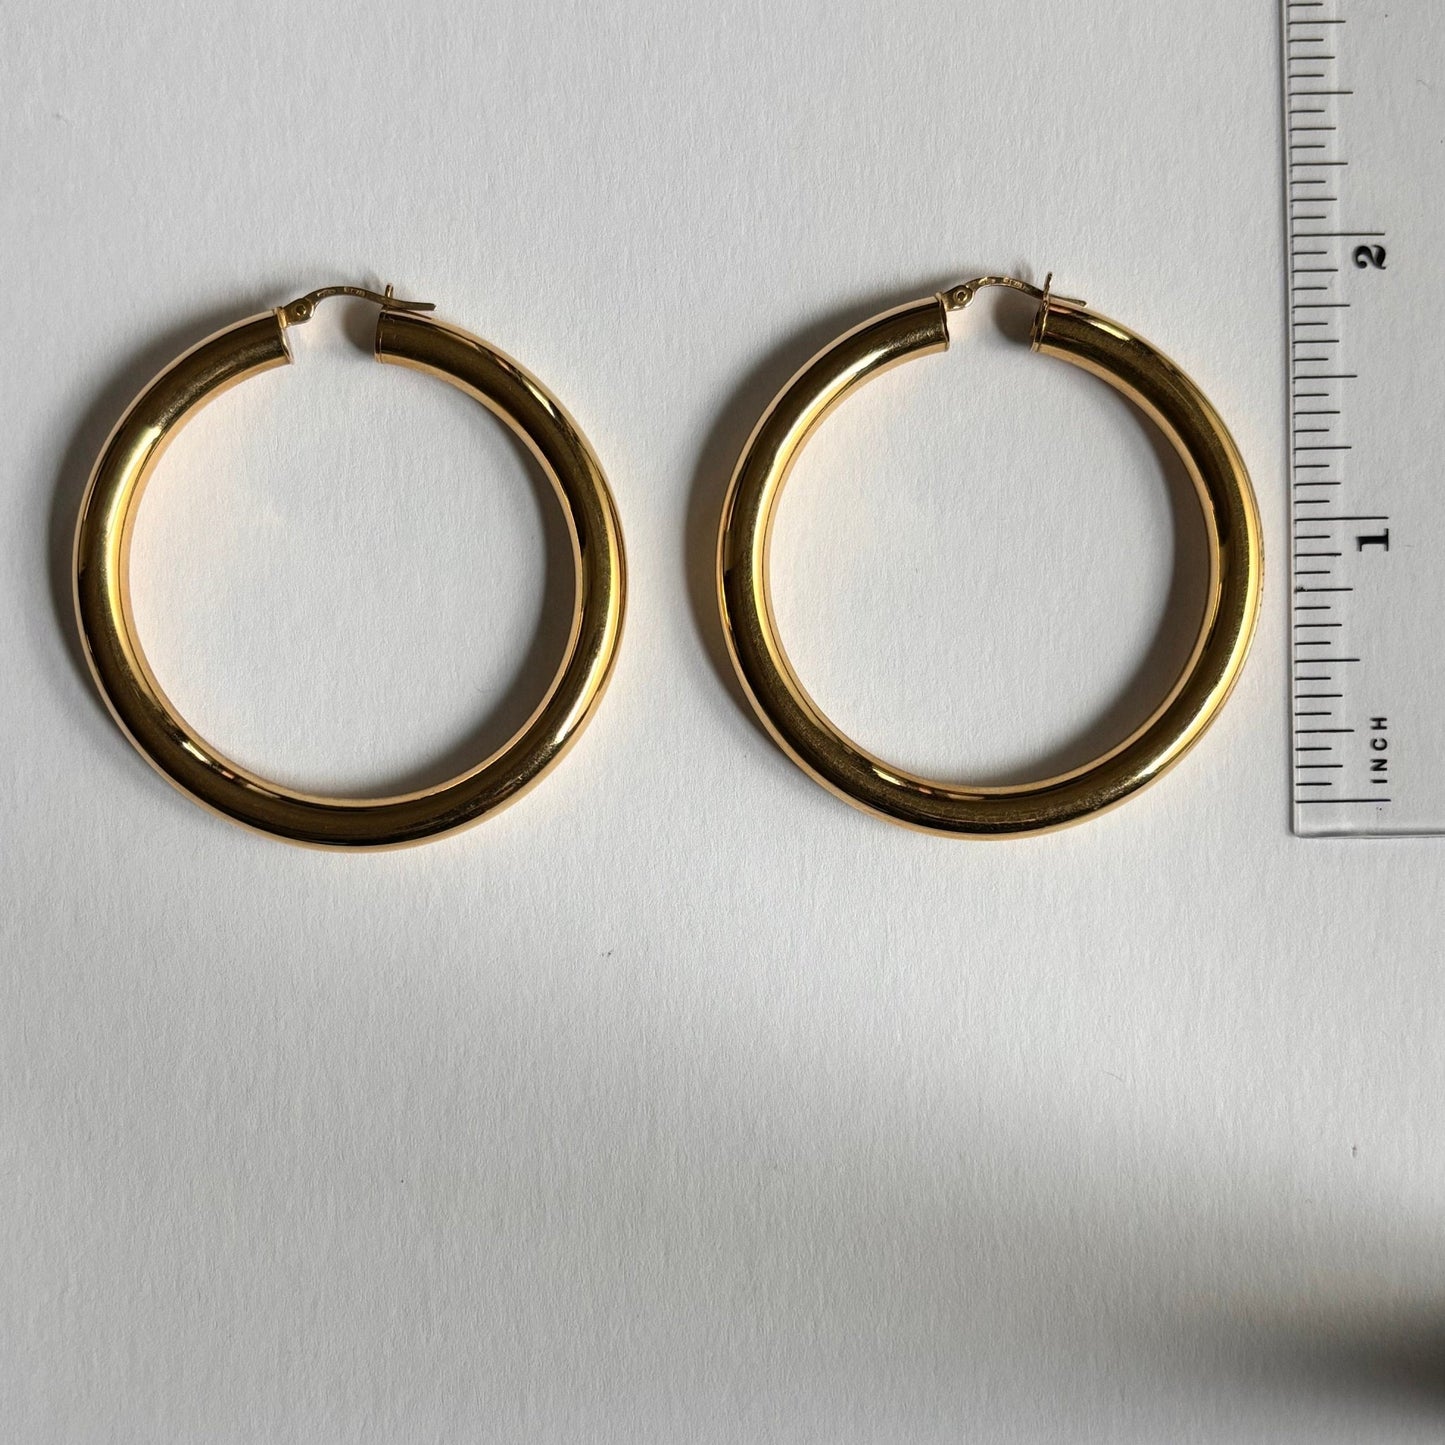 18k Solid Medium Round Gold Classic Hoop Earrings, Polished and Timeless Solid Gold Earrings